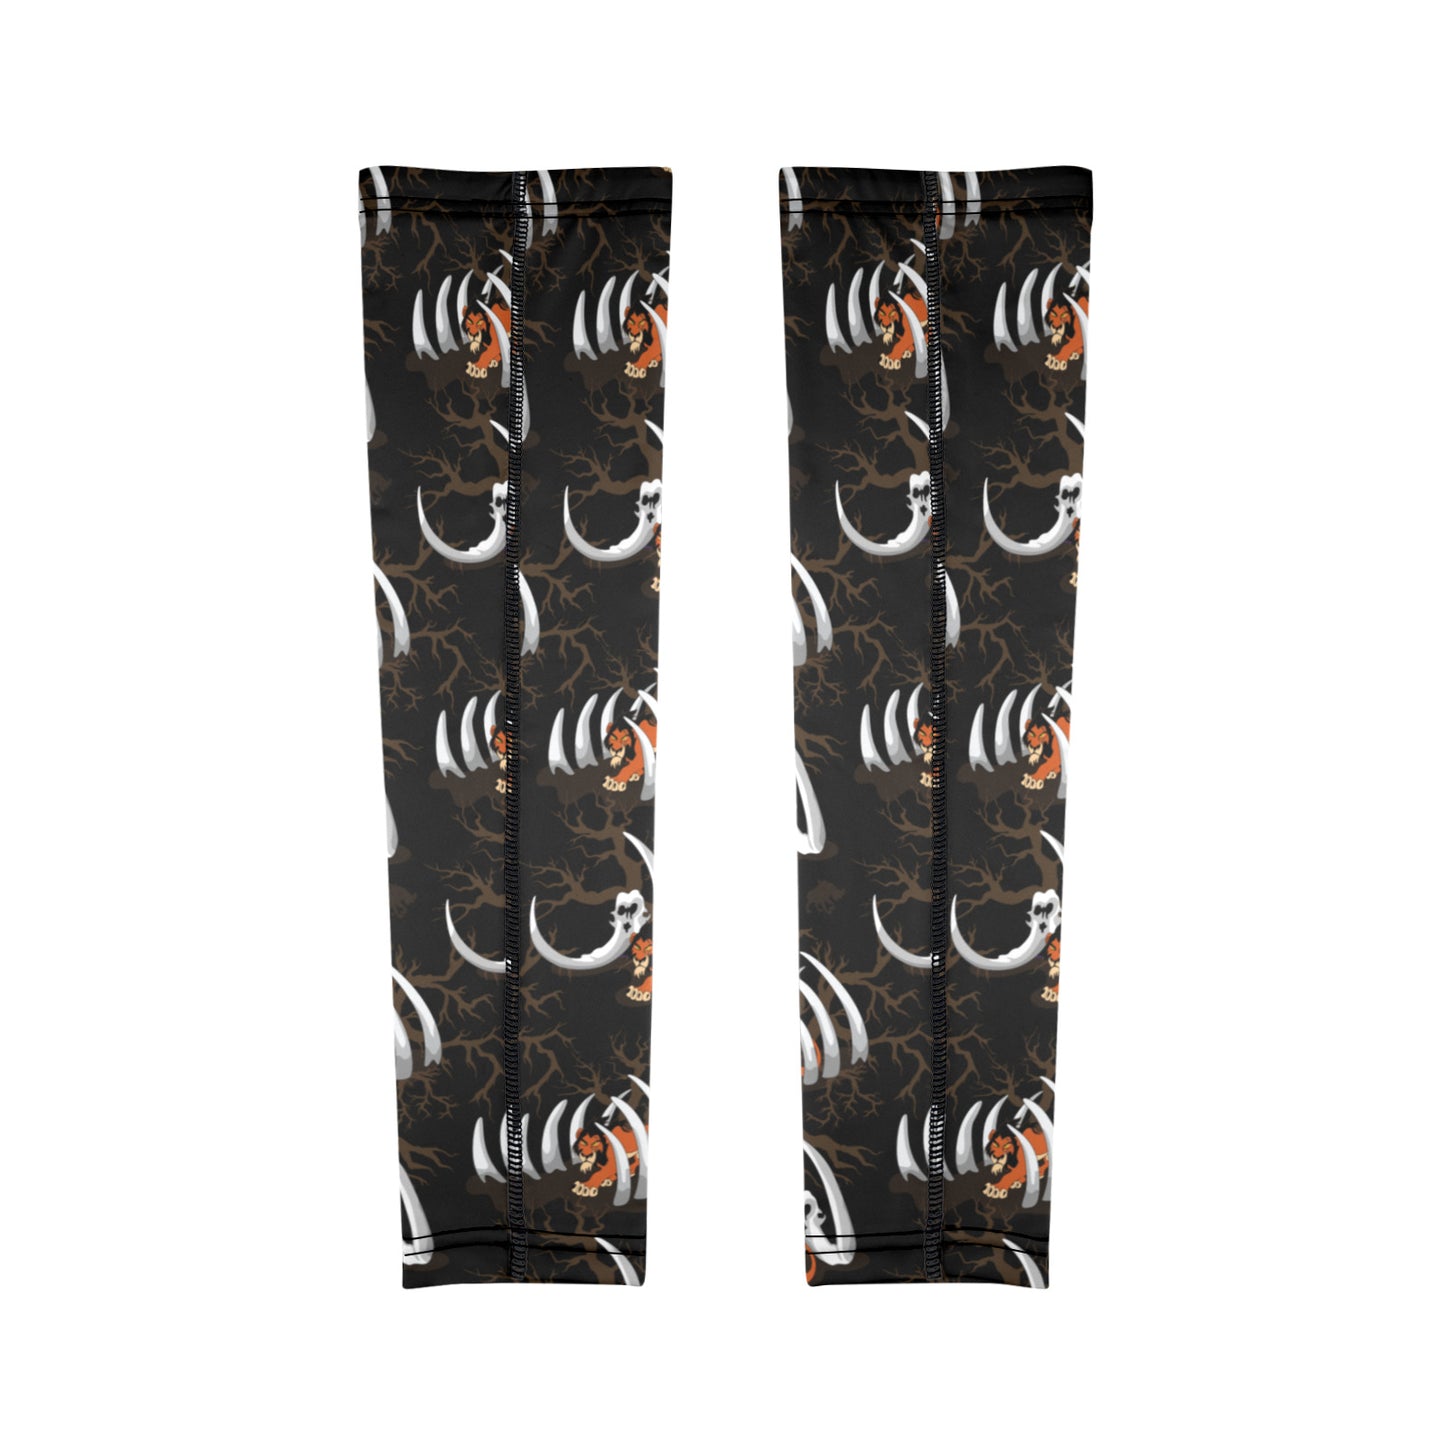 Scar Arm Sleeves (Set of Two)